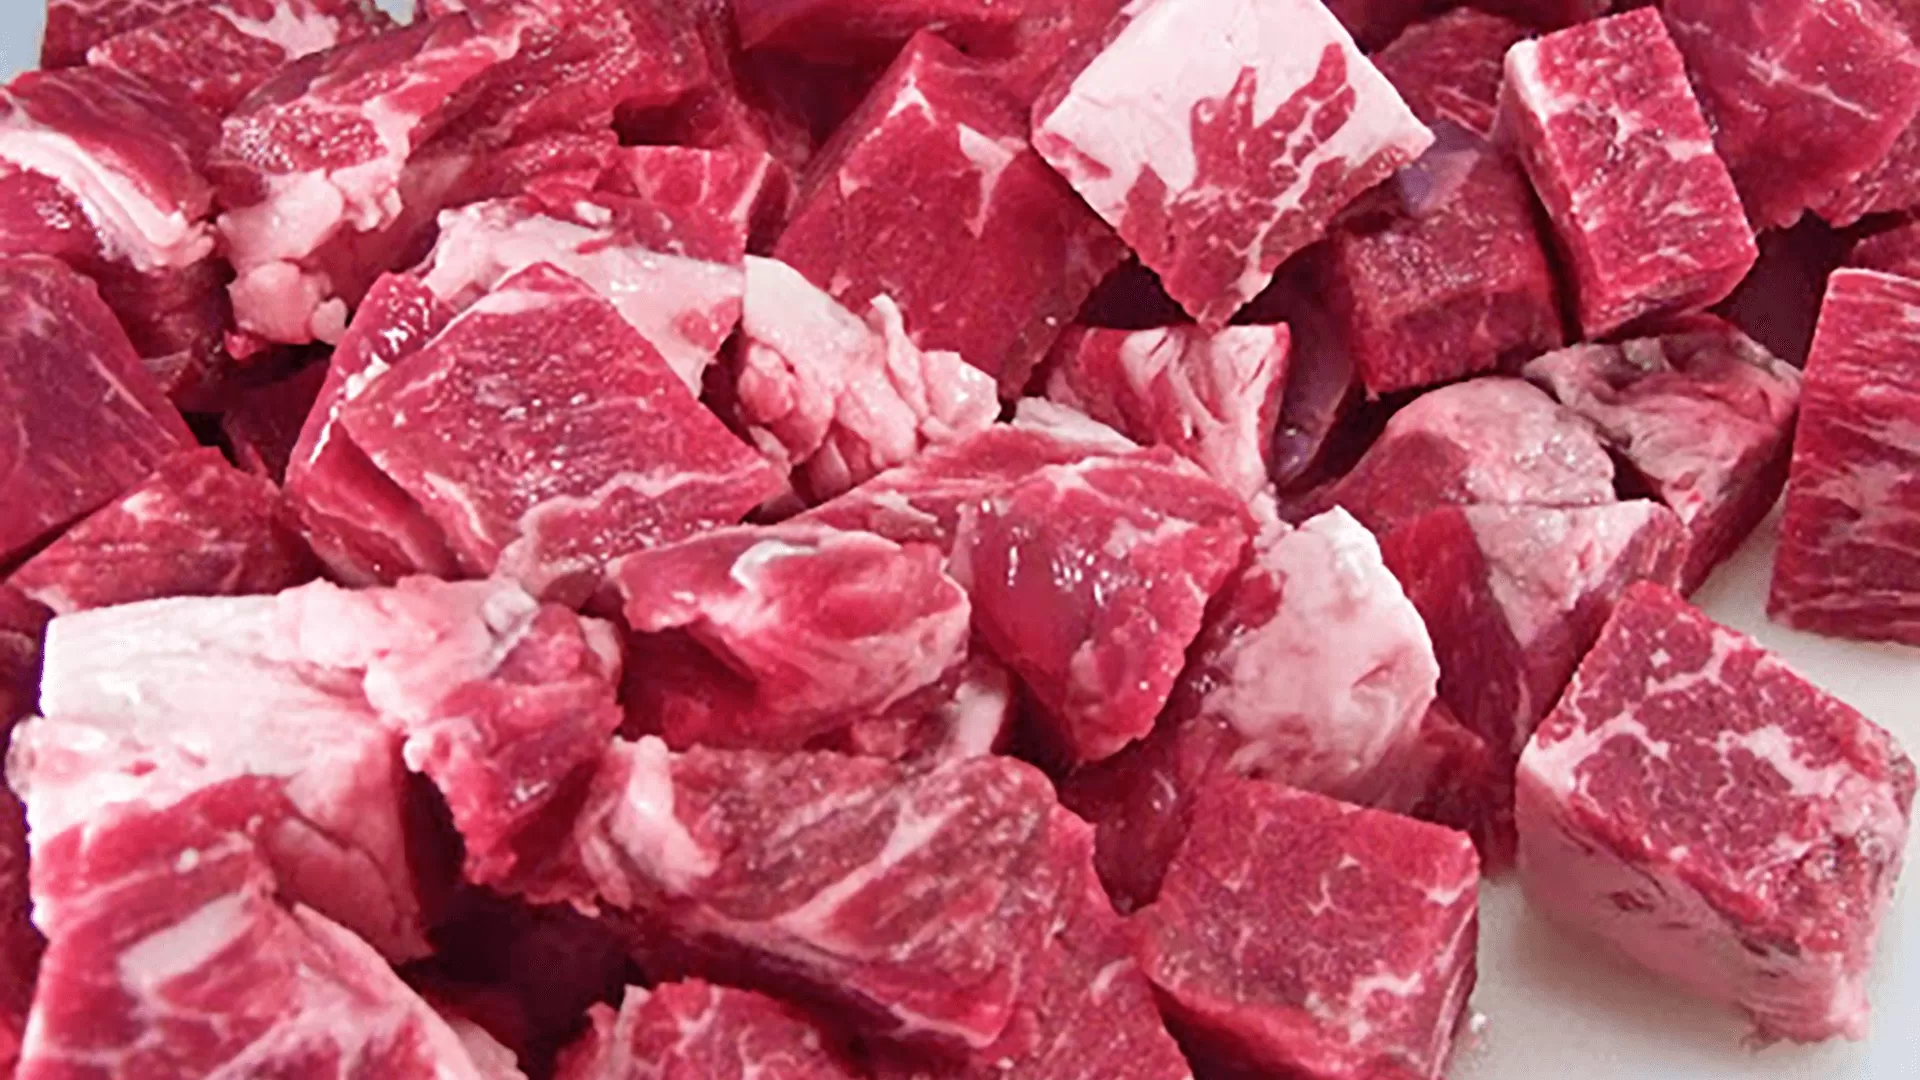 Beef Recipes - Cubed Beef